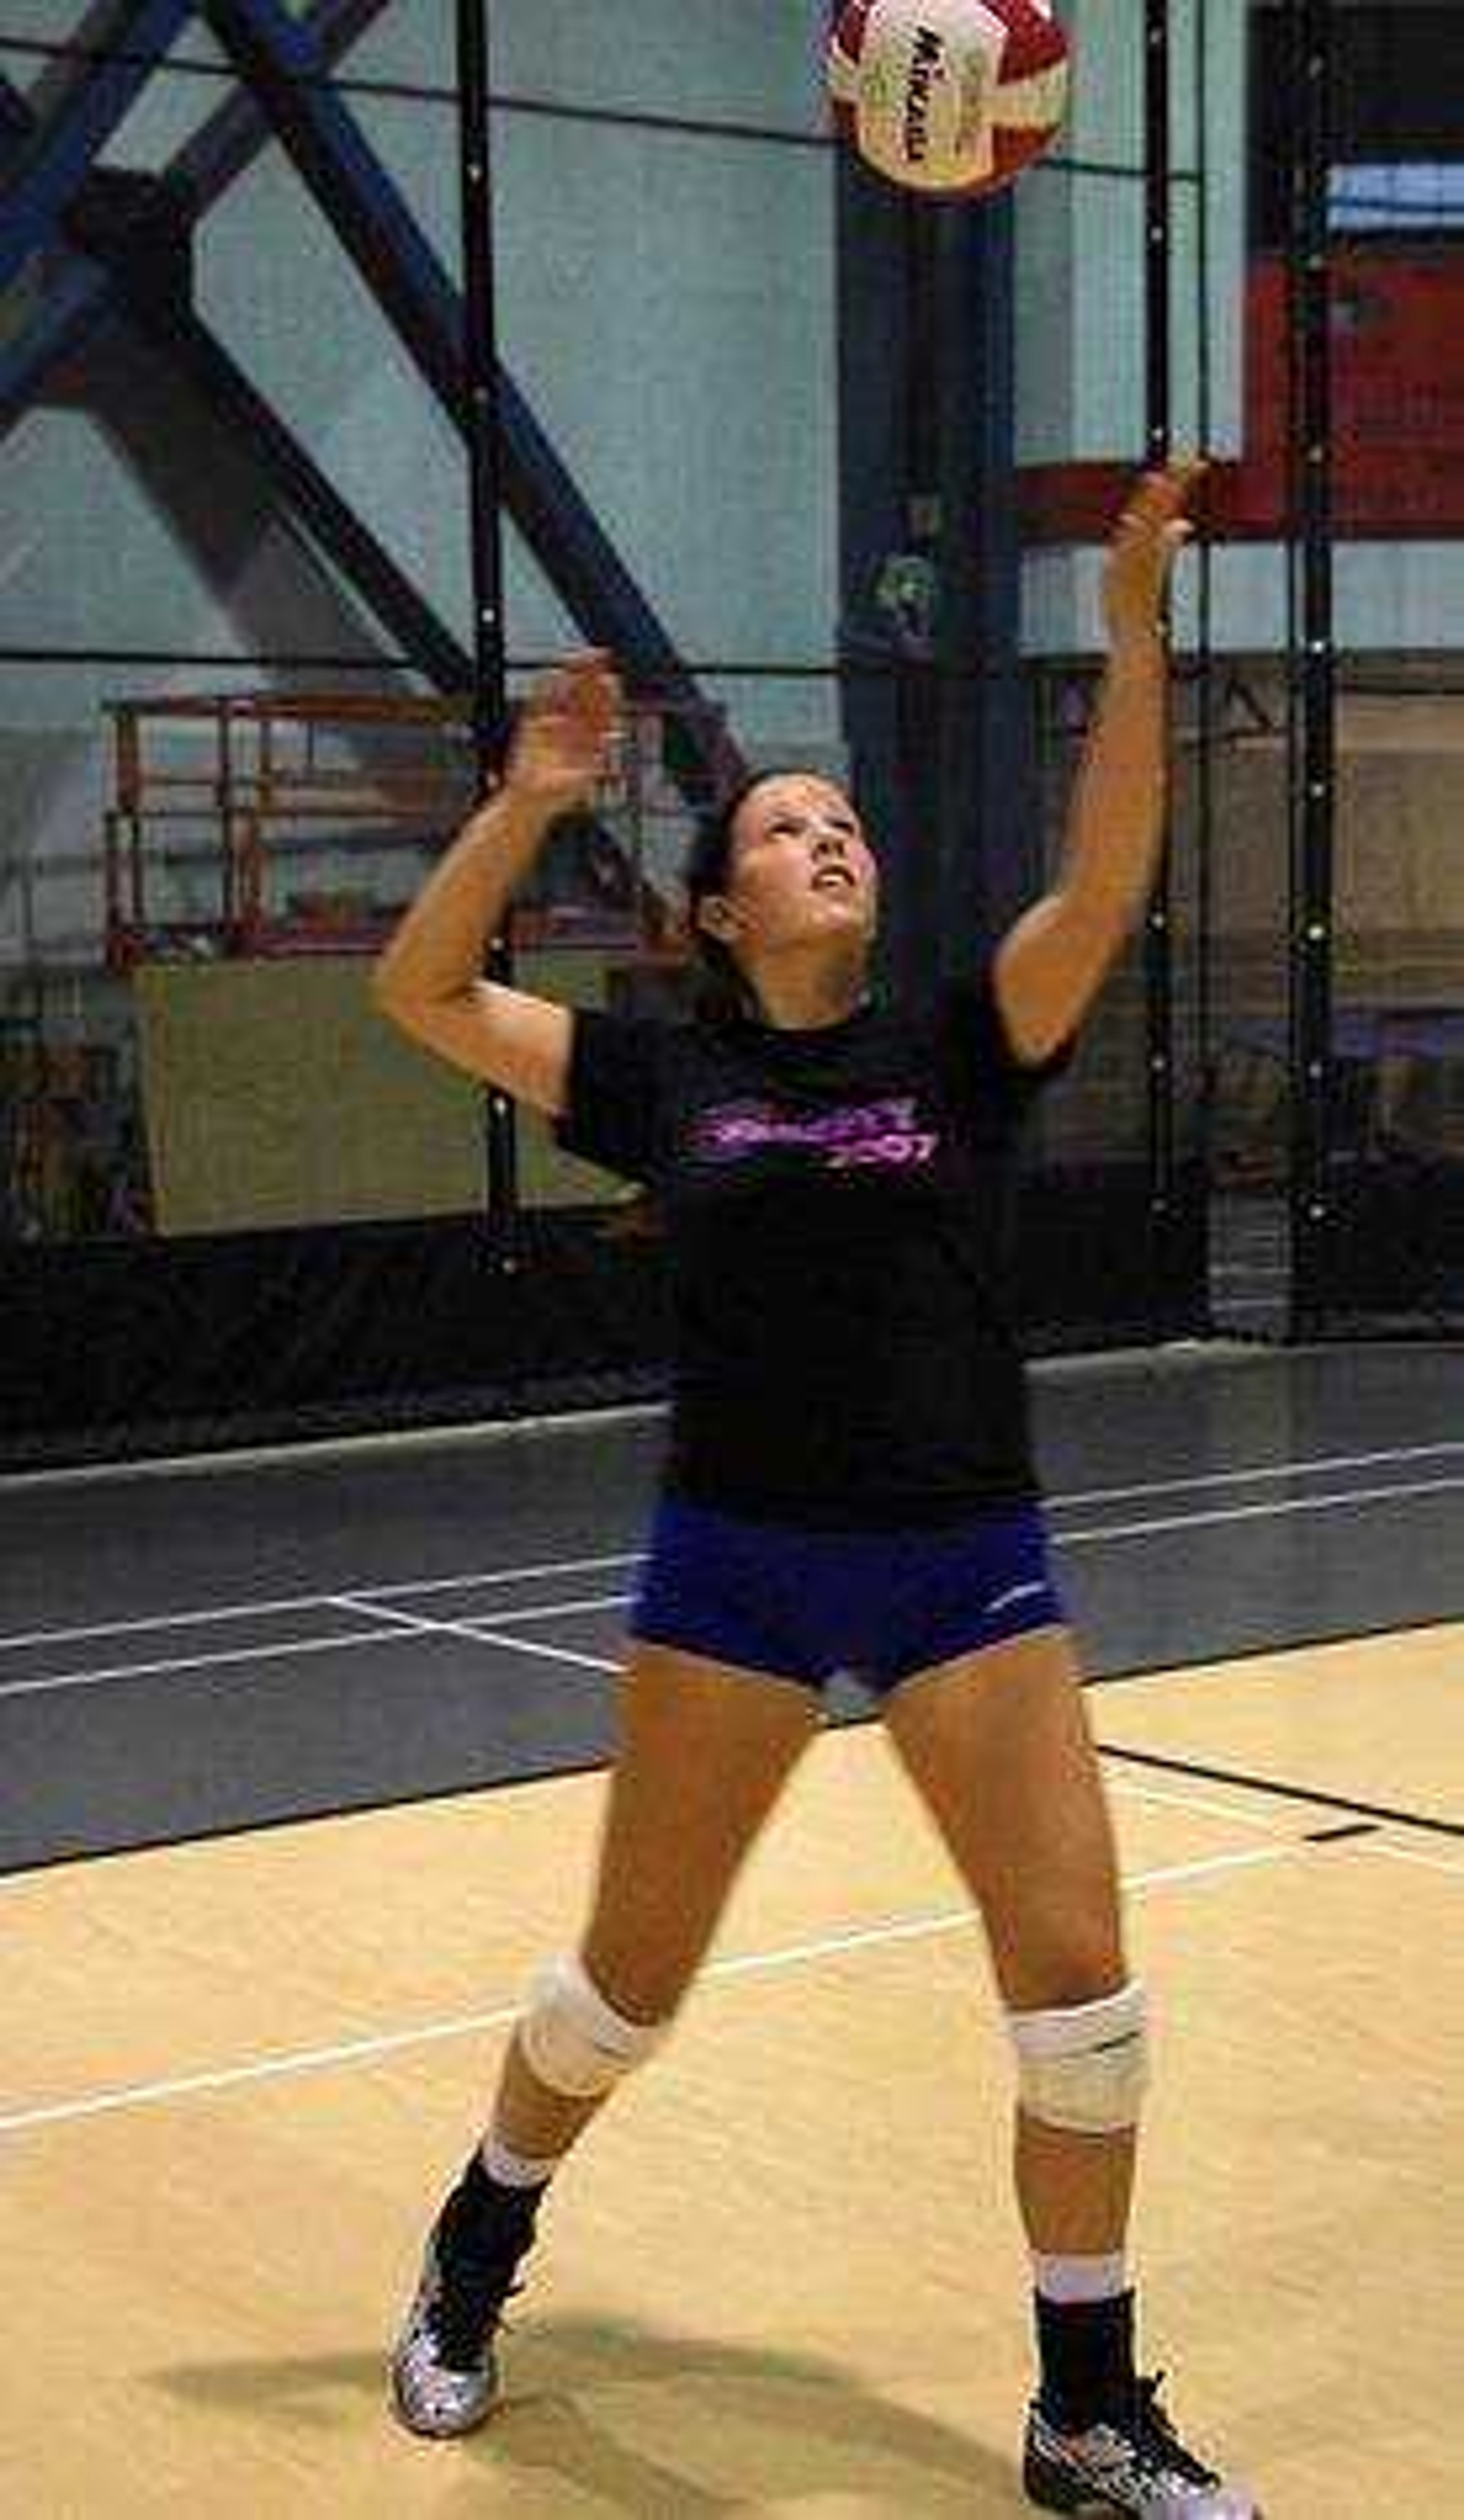 Kristen Stermon serves the ball at practice Tuesday Aug. 28 at Student Recreation Center-North. Photo by Nathan Hamilton